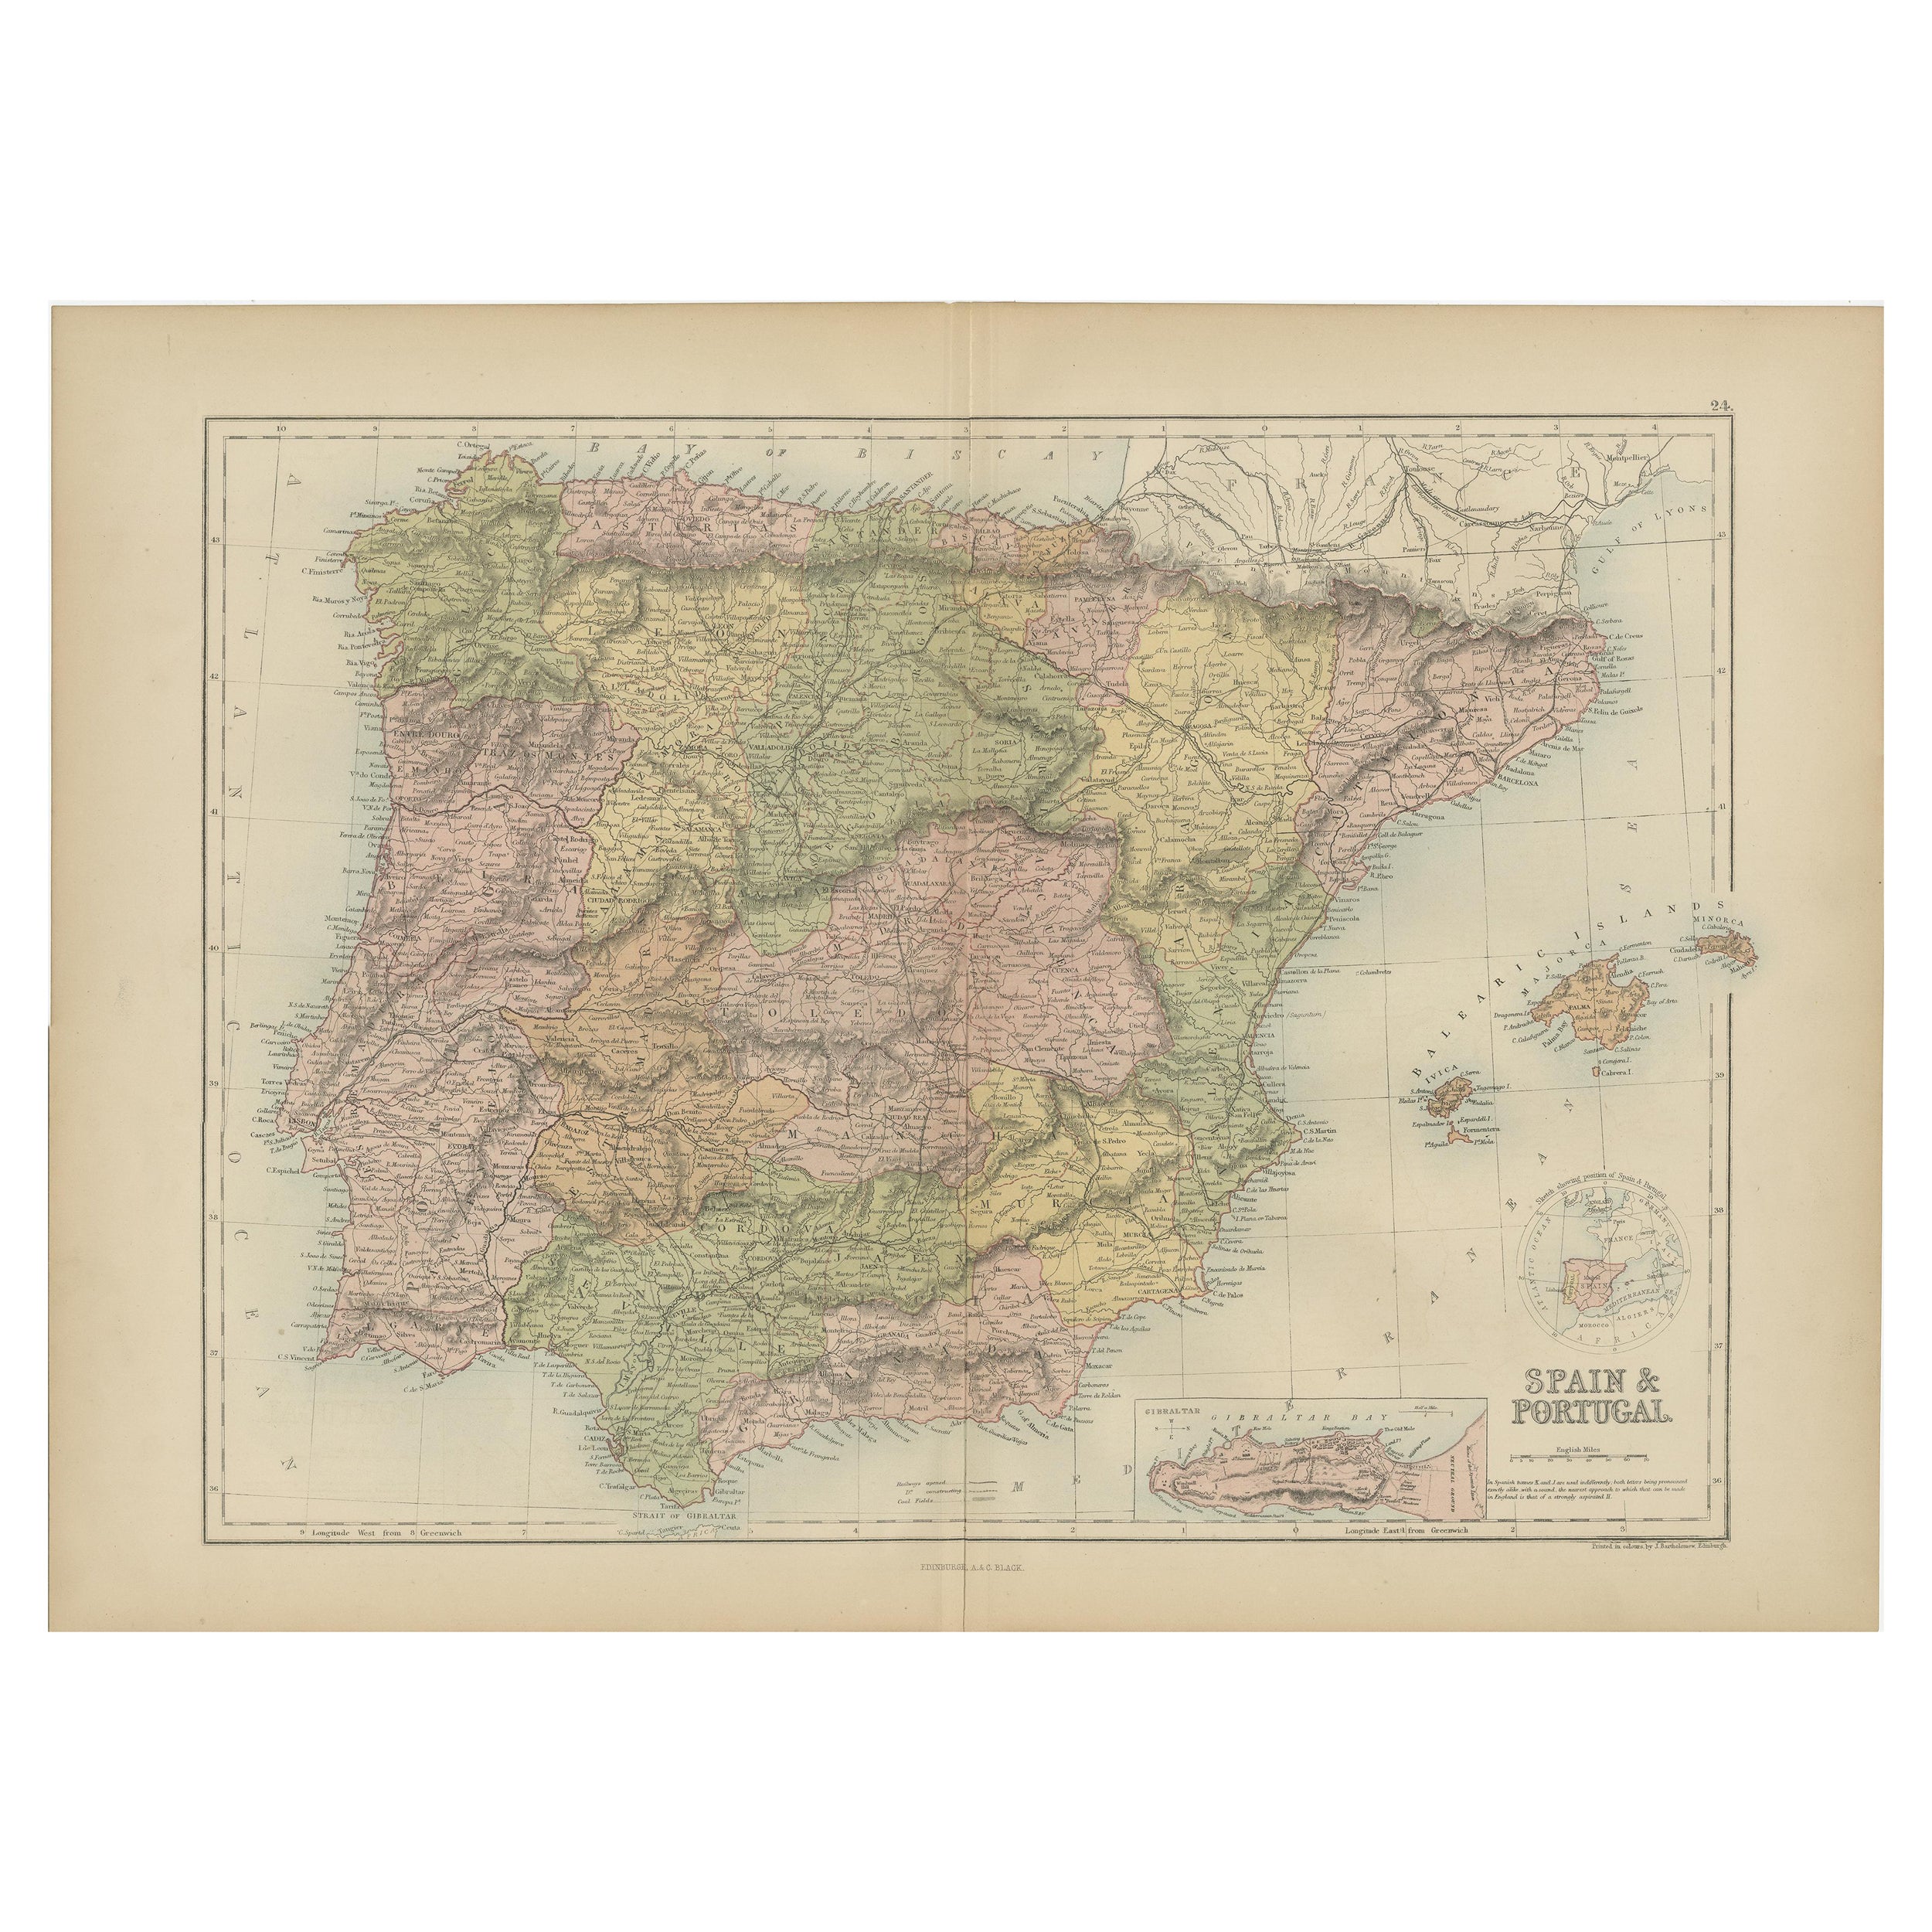 Antique Map of Spain and Portugal by A & C. Black, 1870